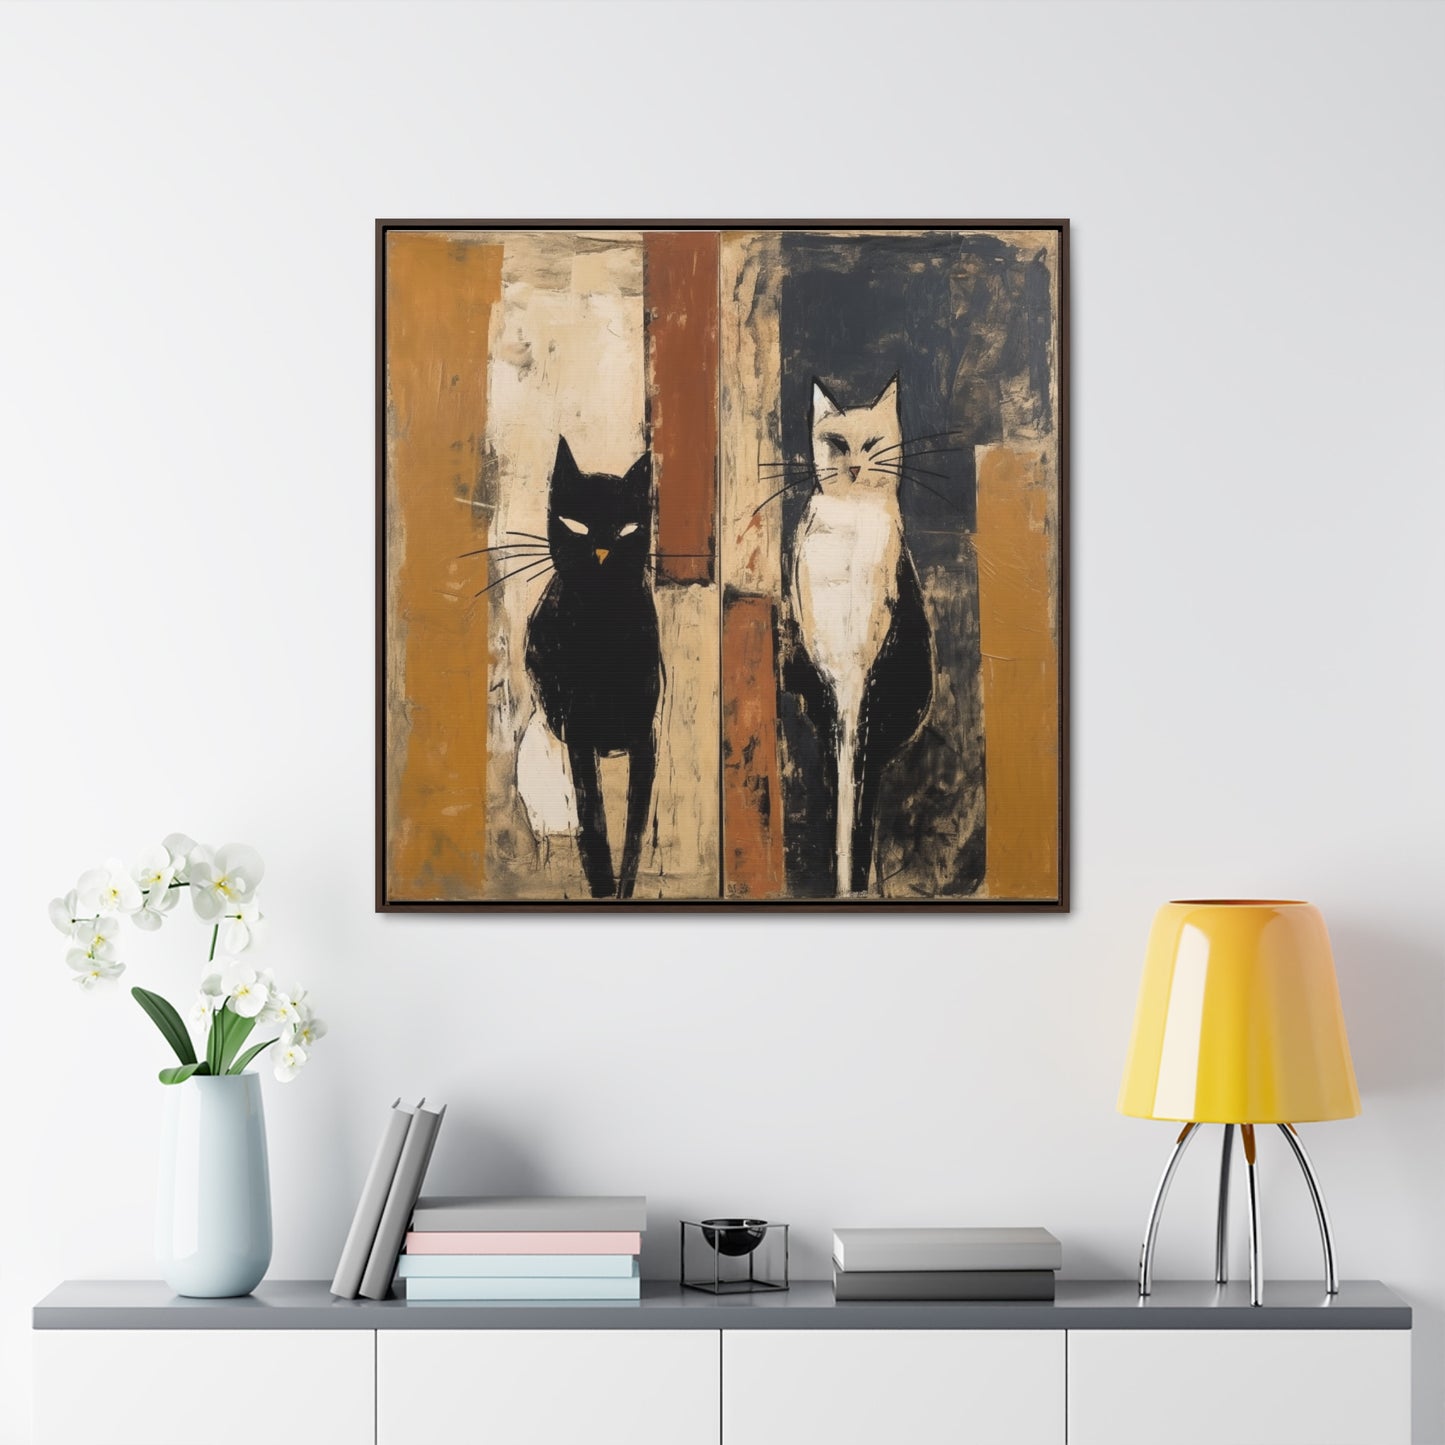 Cat 15, Gallery Canvas Wraps, Square Frame